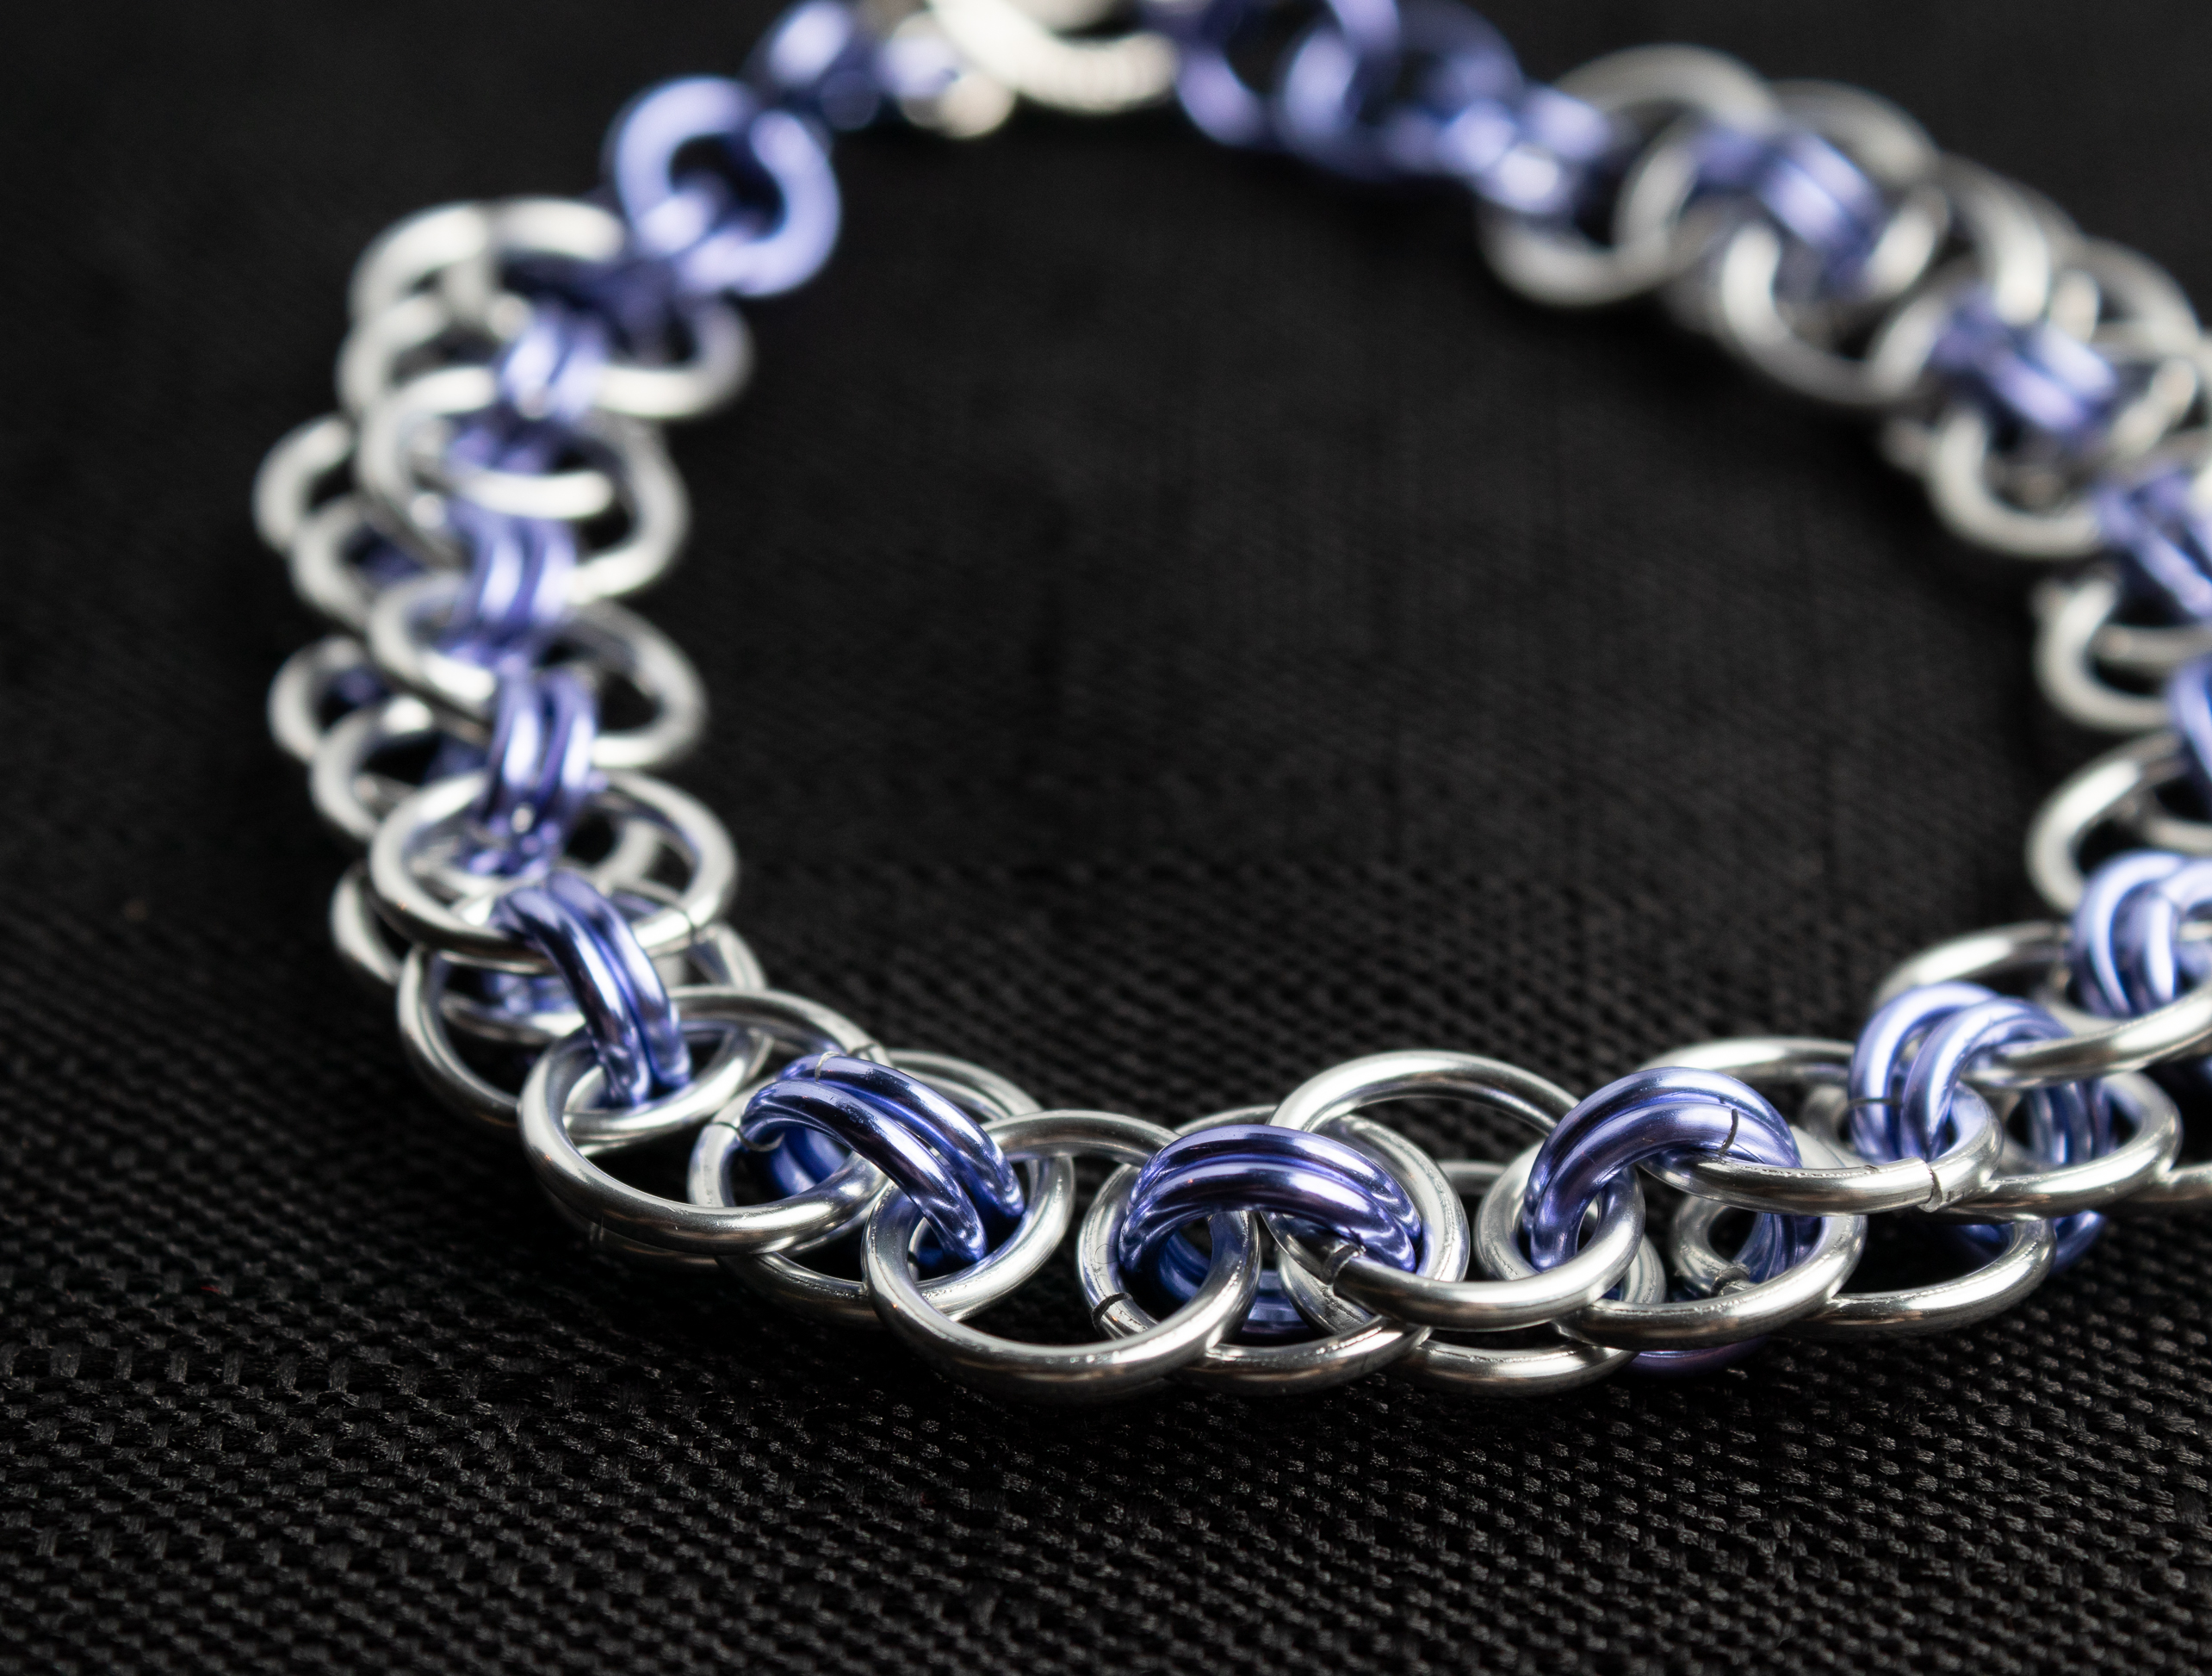 Close-up of a purple and silver chain bracelet